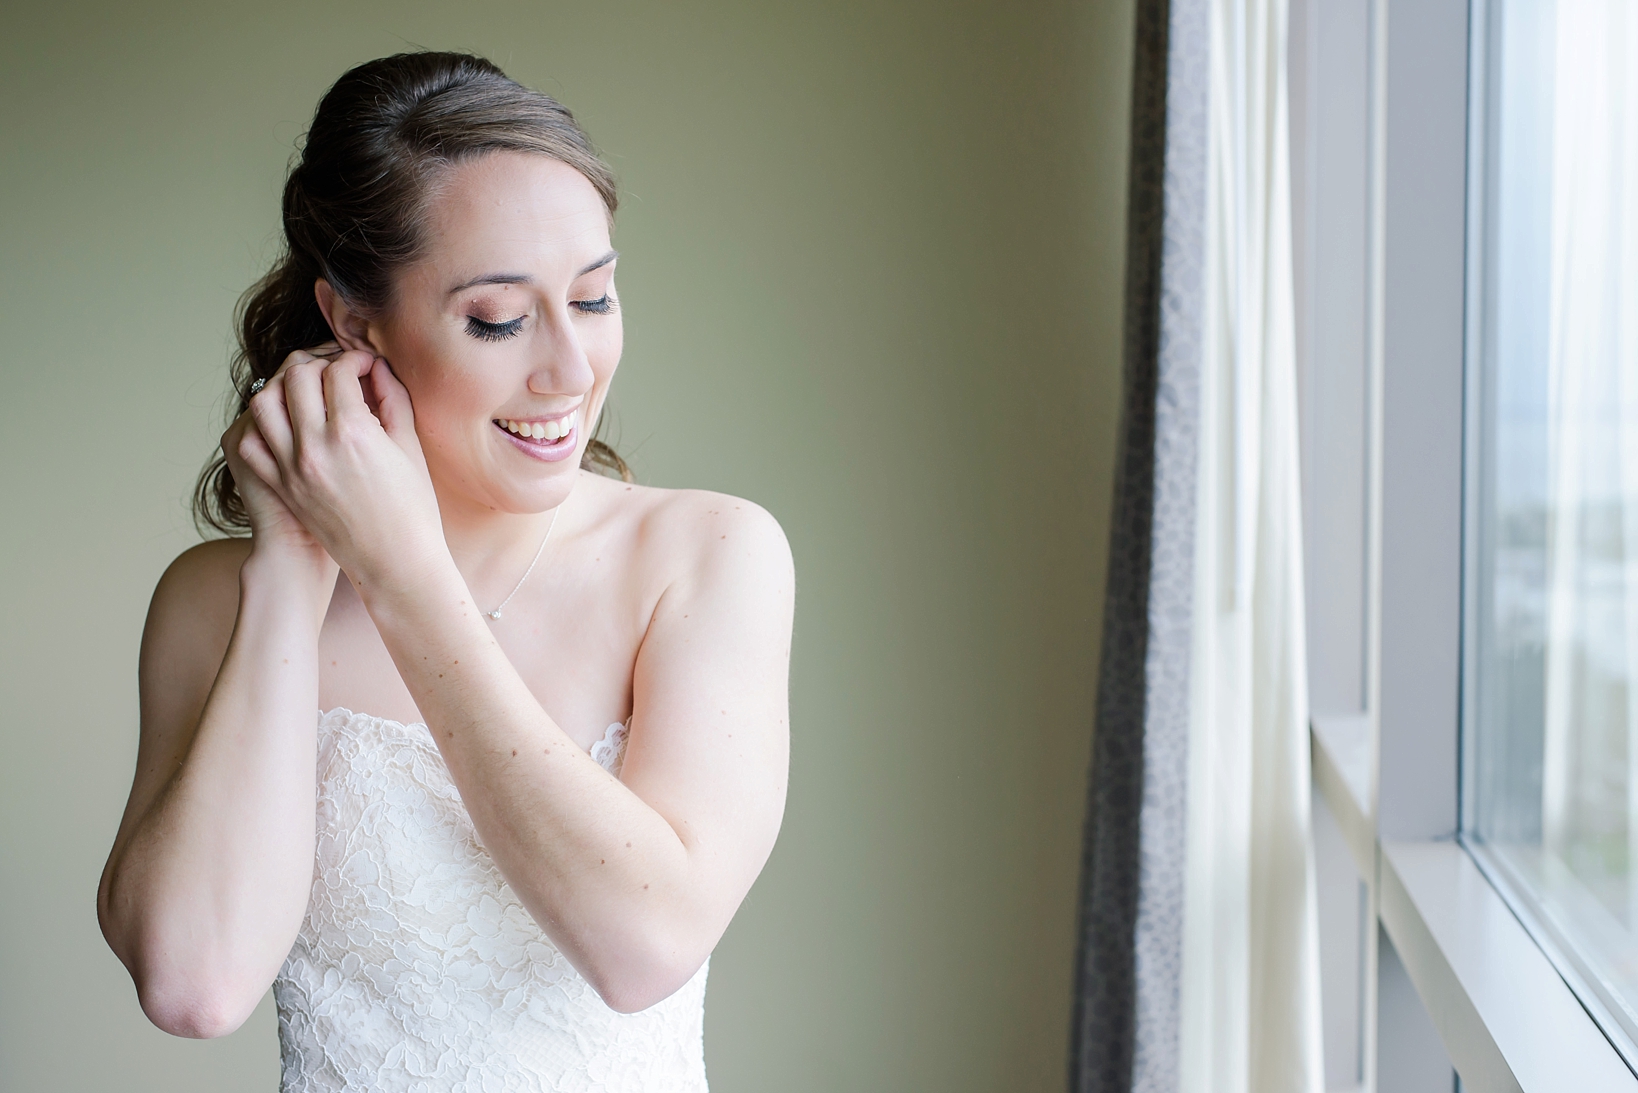 Bride putting her jewelry on in front of a window